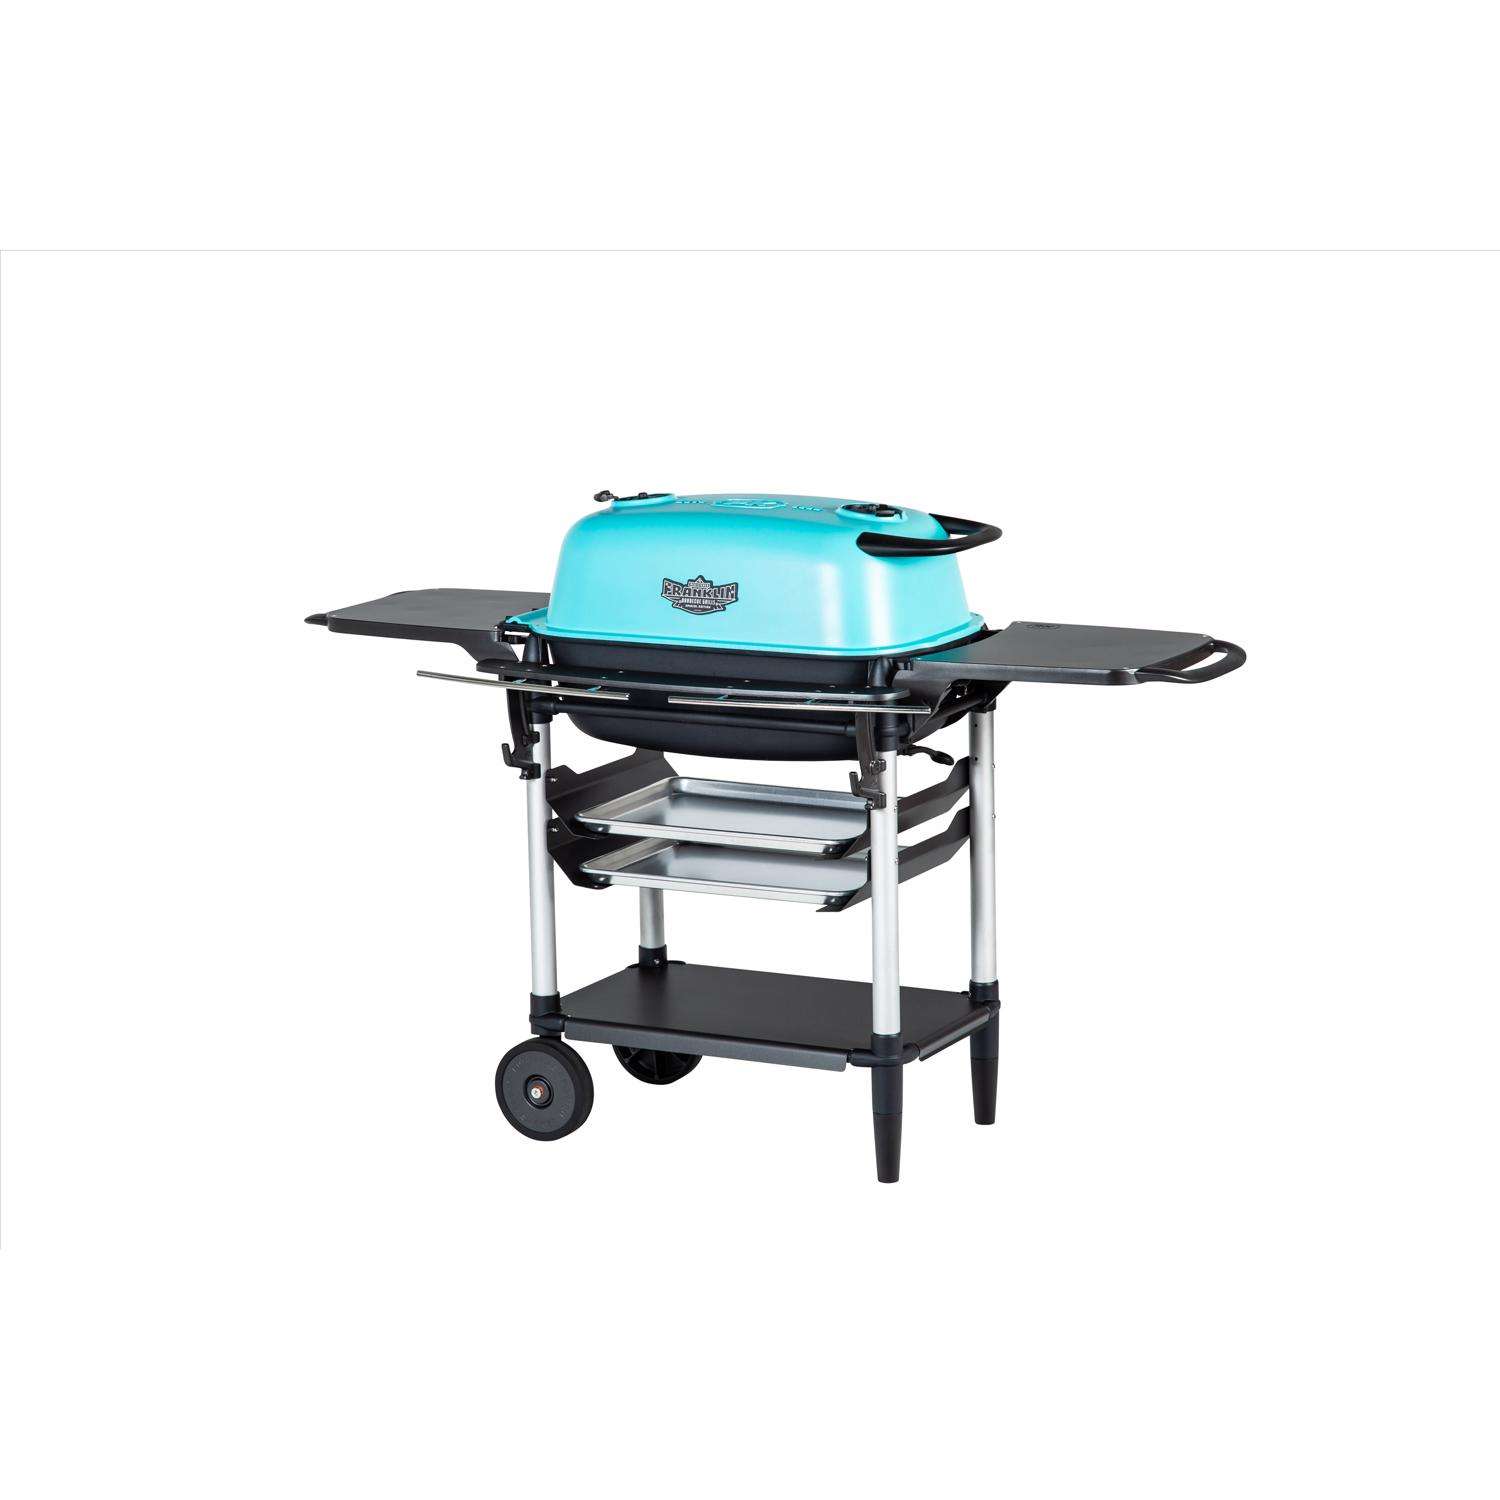 Popular Mechanics Agrees: The PK Grill is One of a Kind - PK Grills